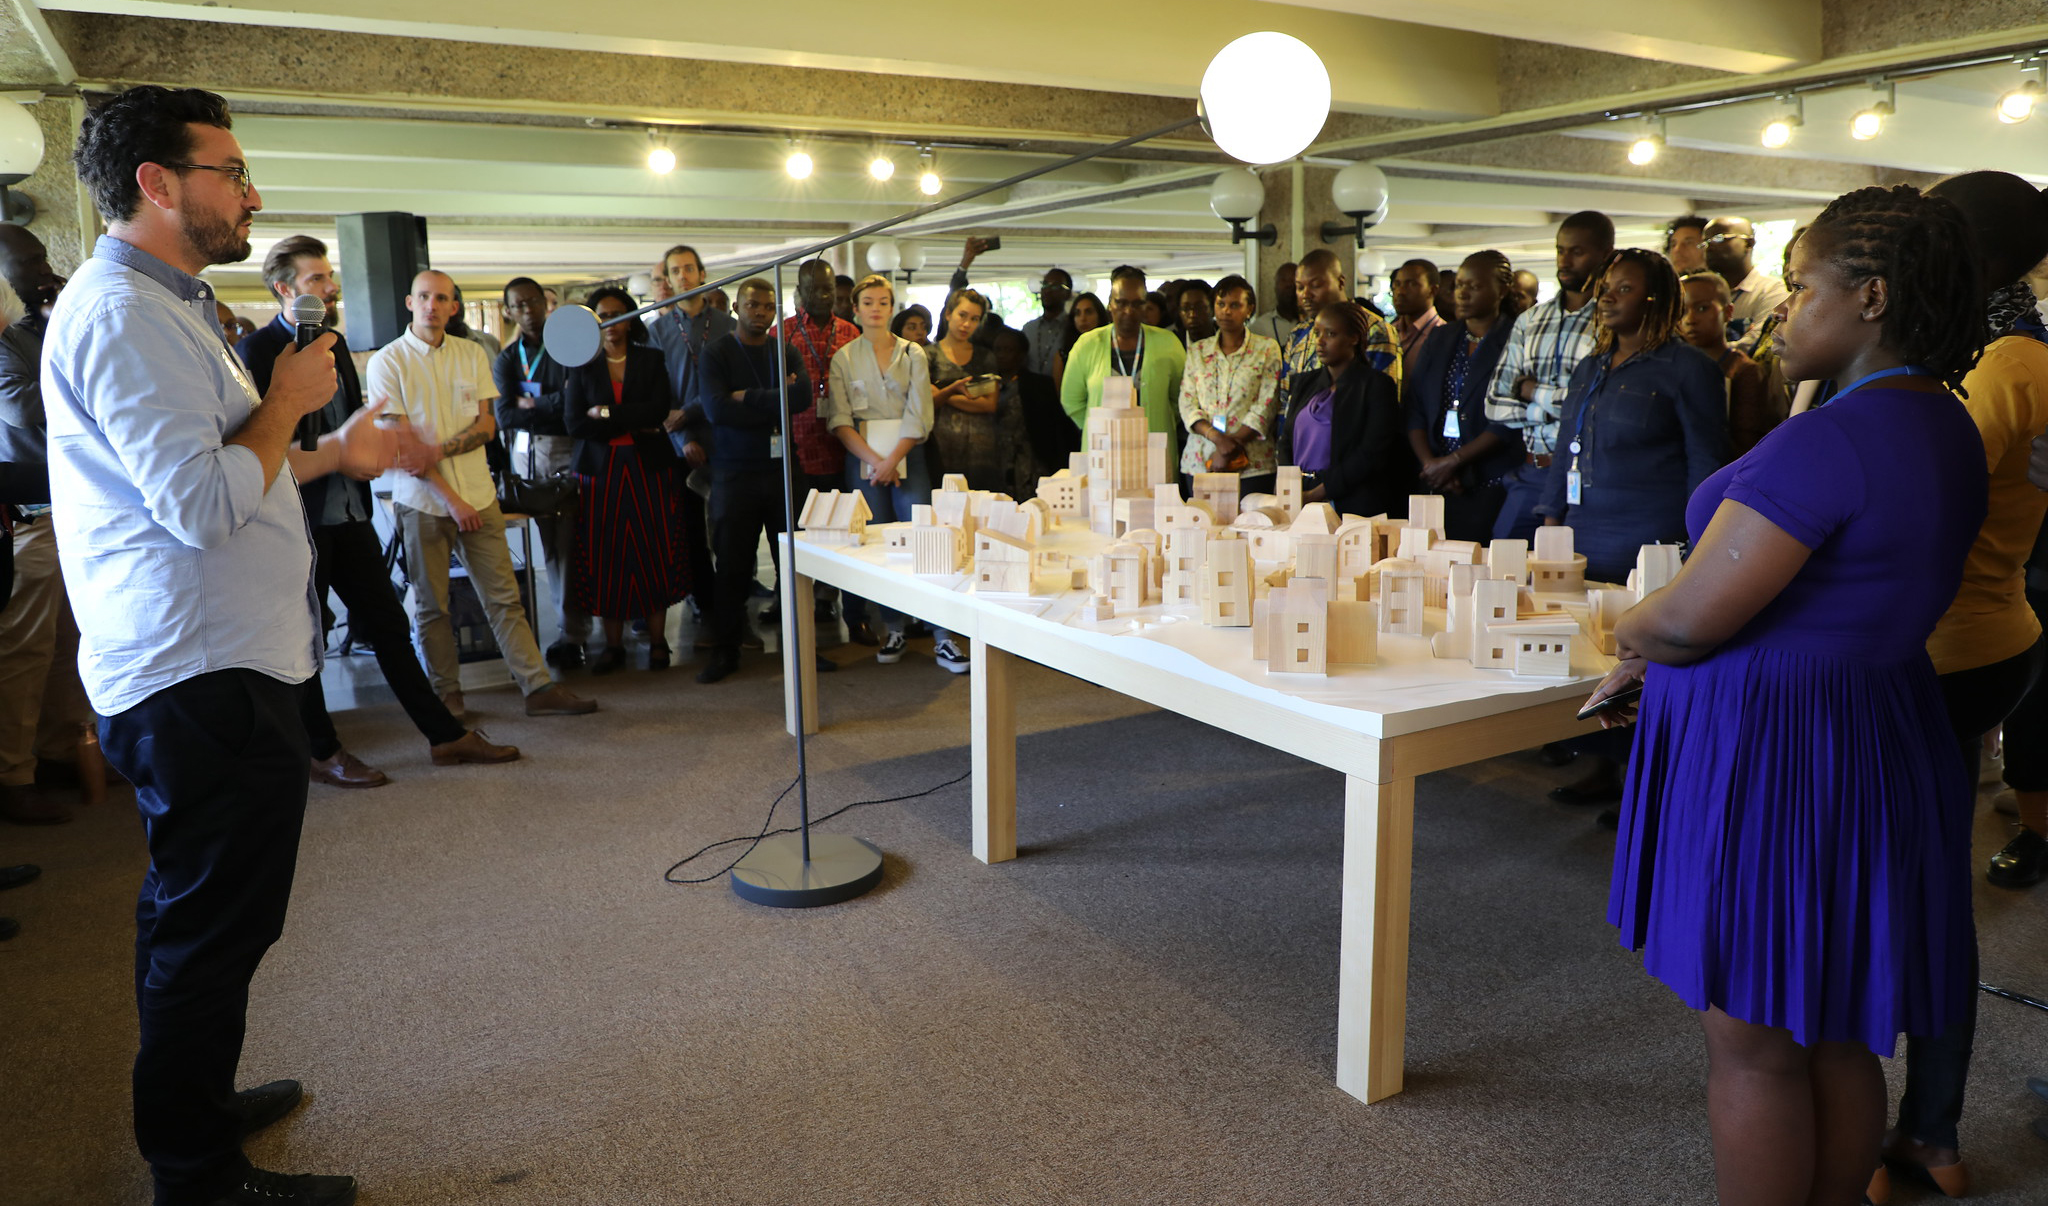 Solarville was presented at the UN offices in Nairobi